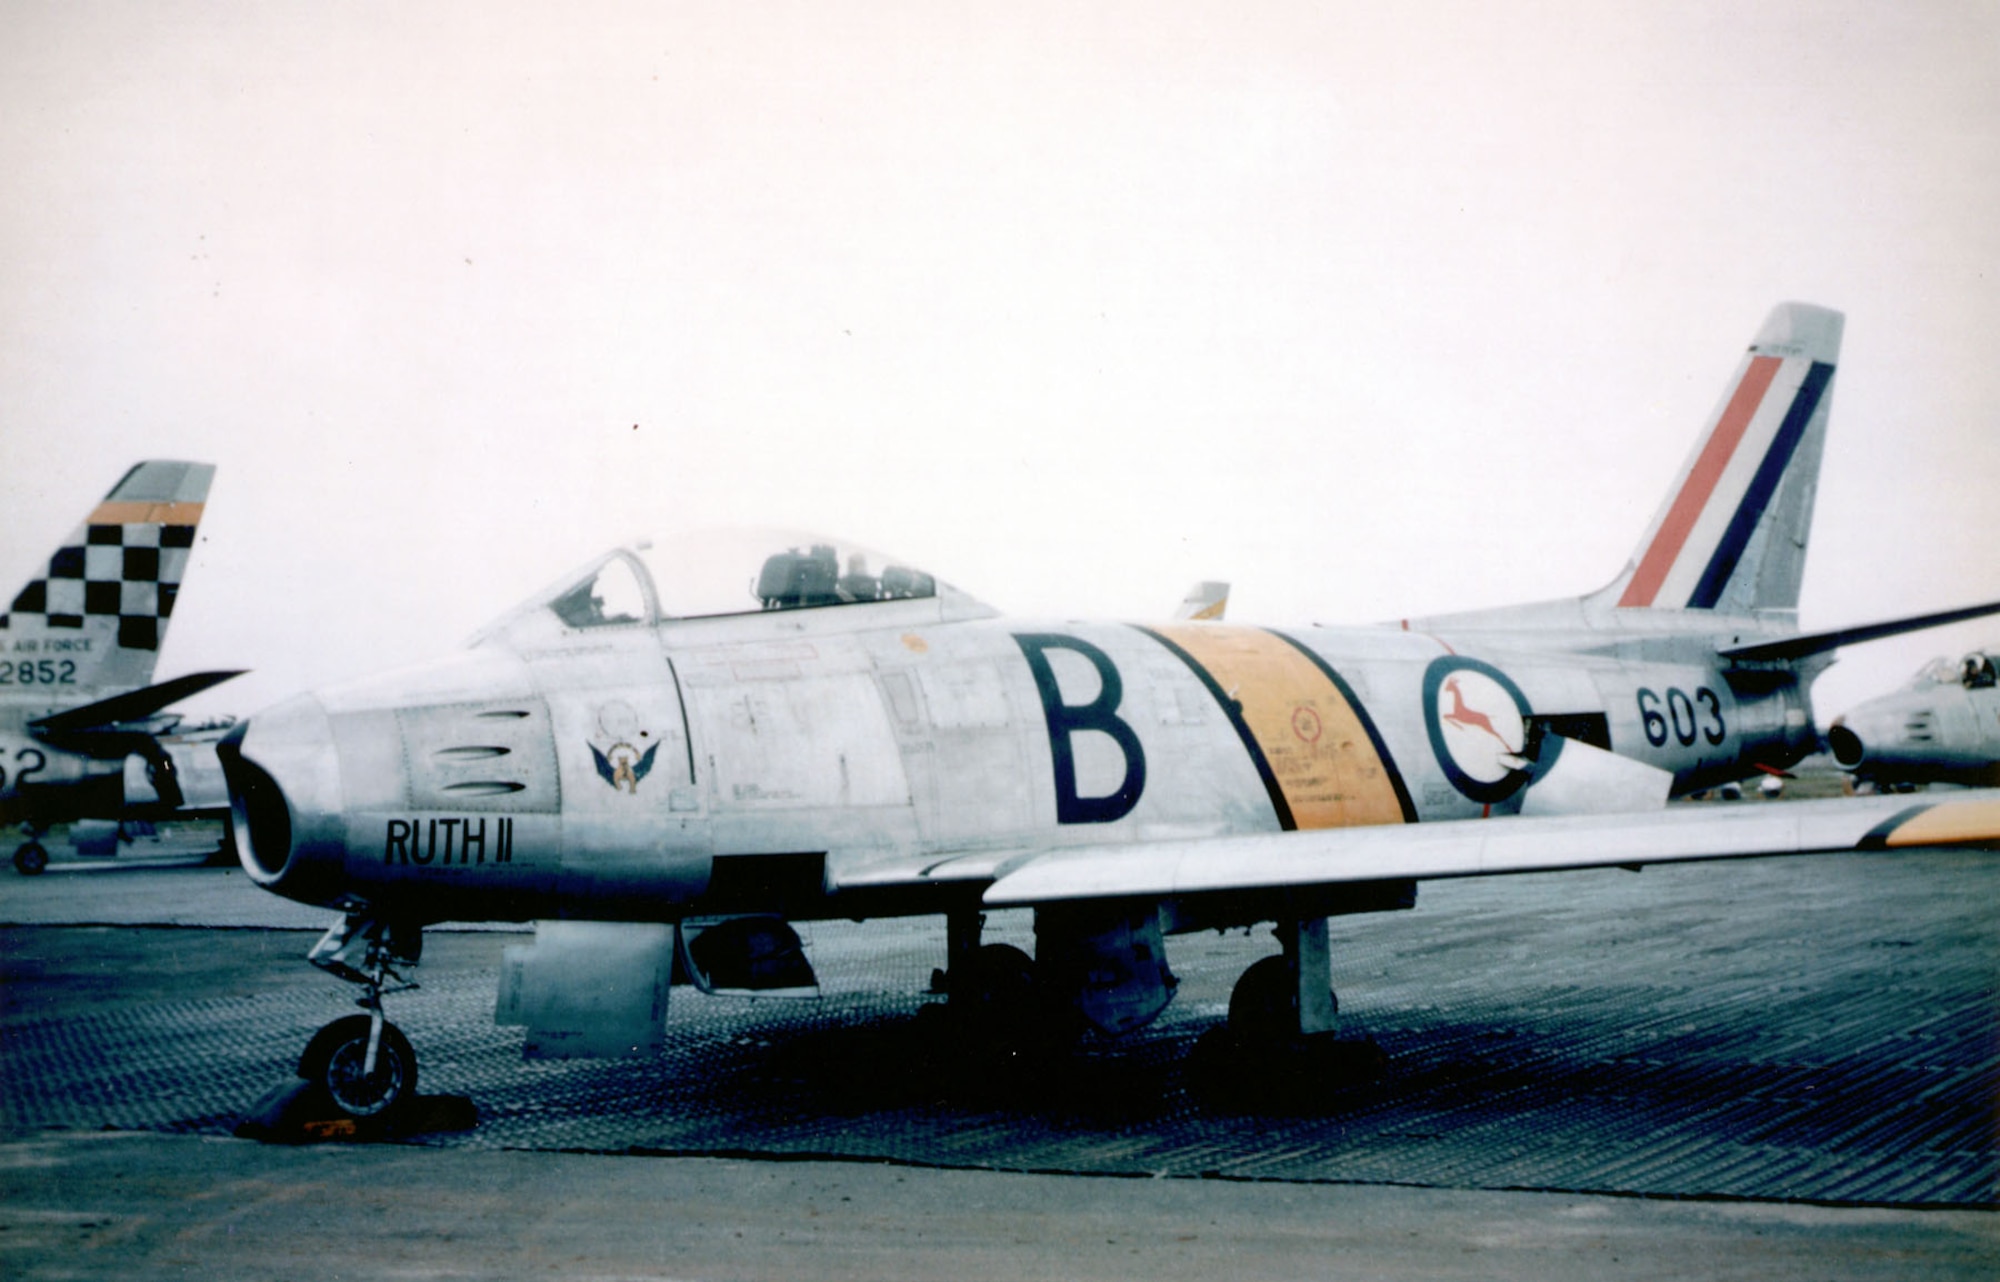 The South African Air Force's 2nd Squadron transitioned from F-51s to the F-86F while attached to a USAF fighter-bomber wing. (U.S. Air Force photo)